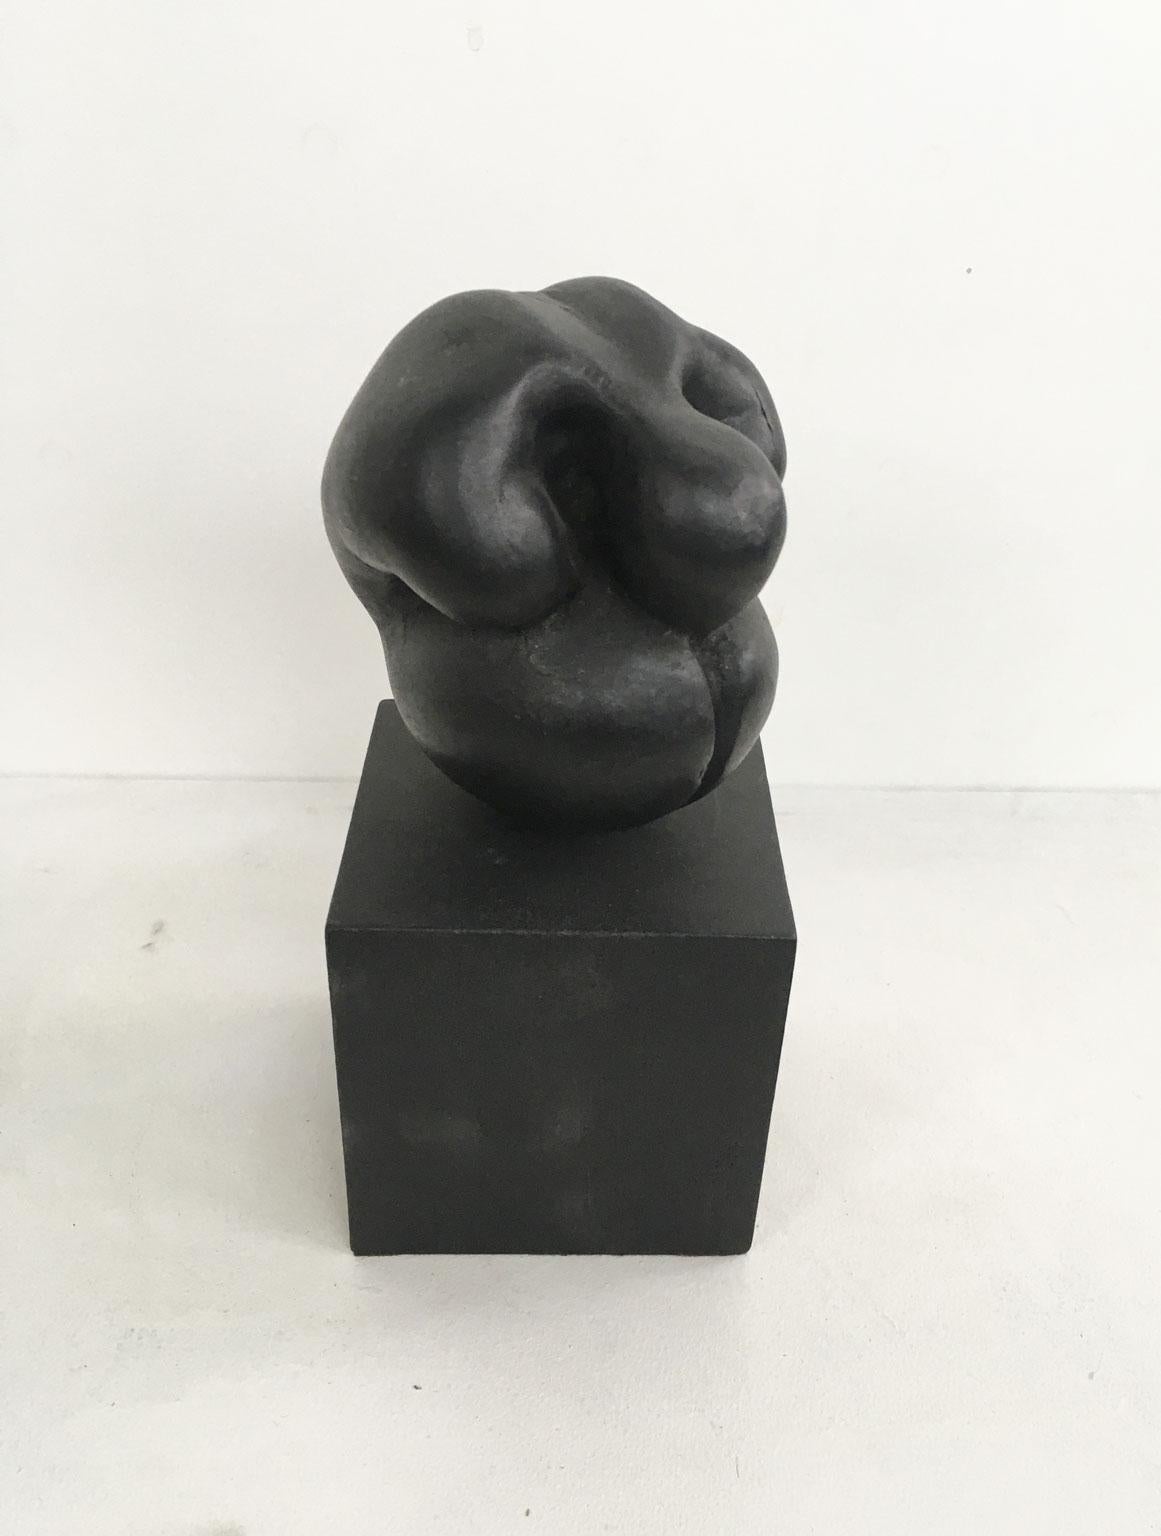 1988 Italy Black Aluminum Abstract Sculpture by Patrizia Guerresi Title Deji For Sale 6